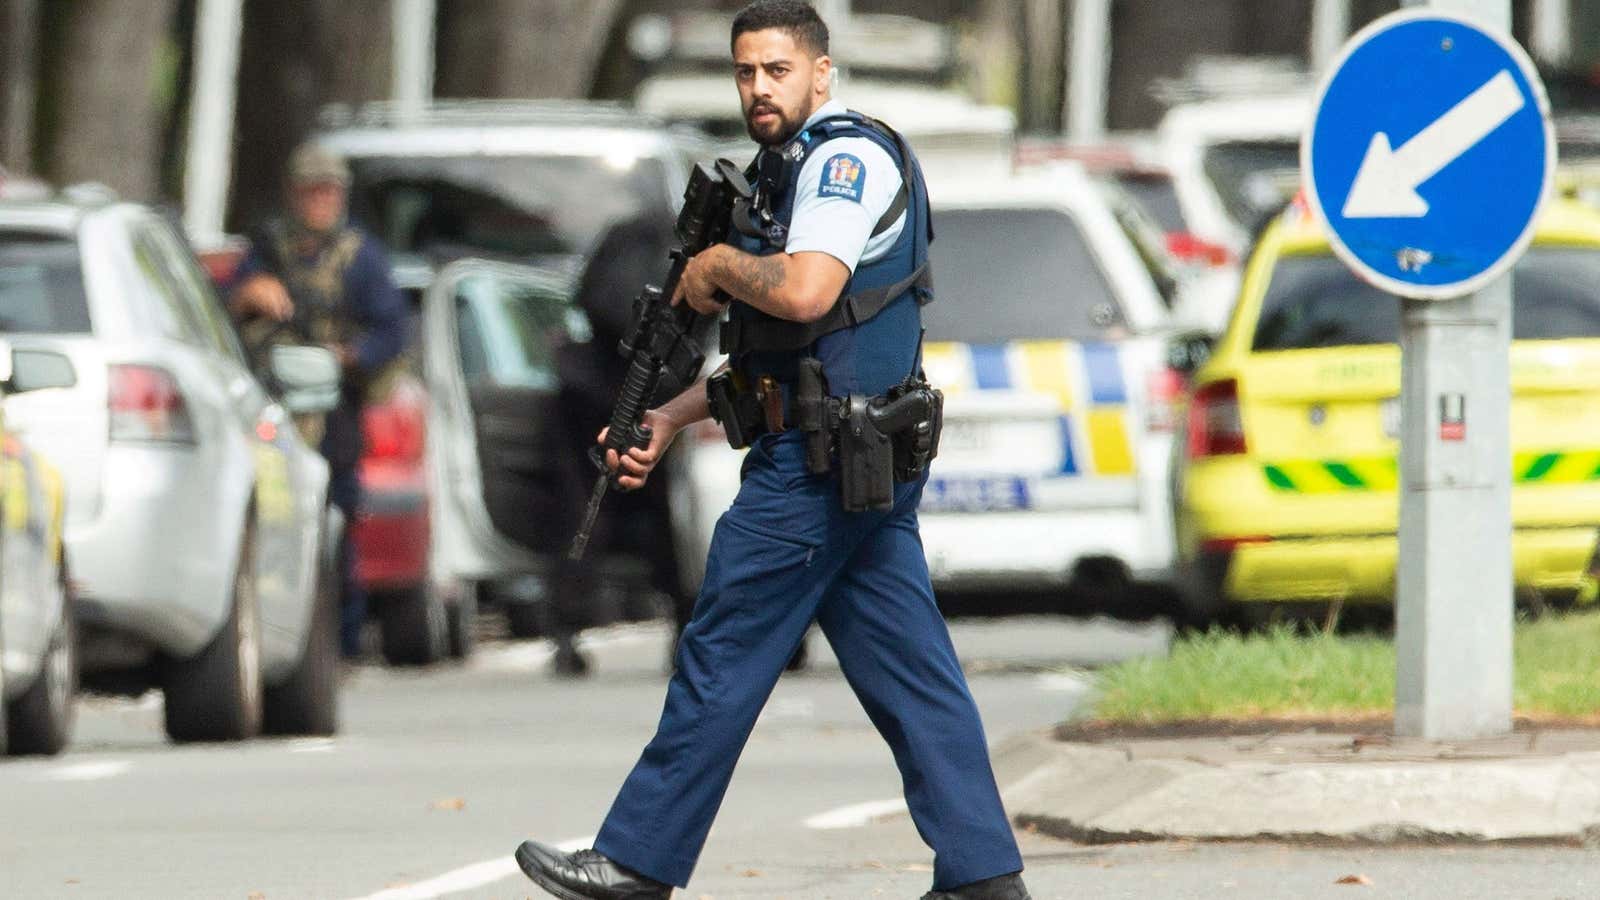 Armed police on the streets of Christchurch on Friday.